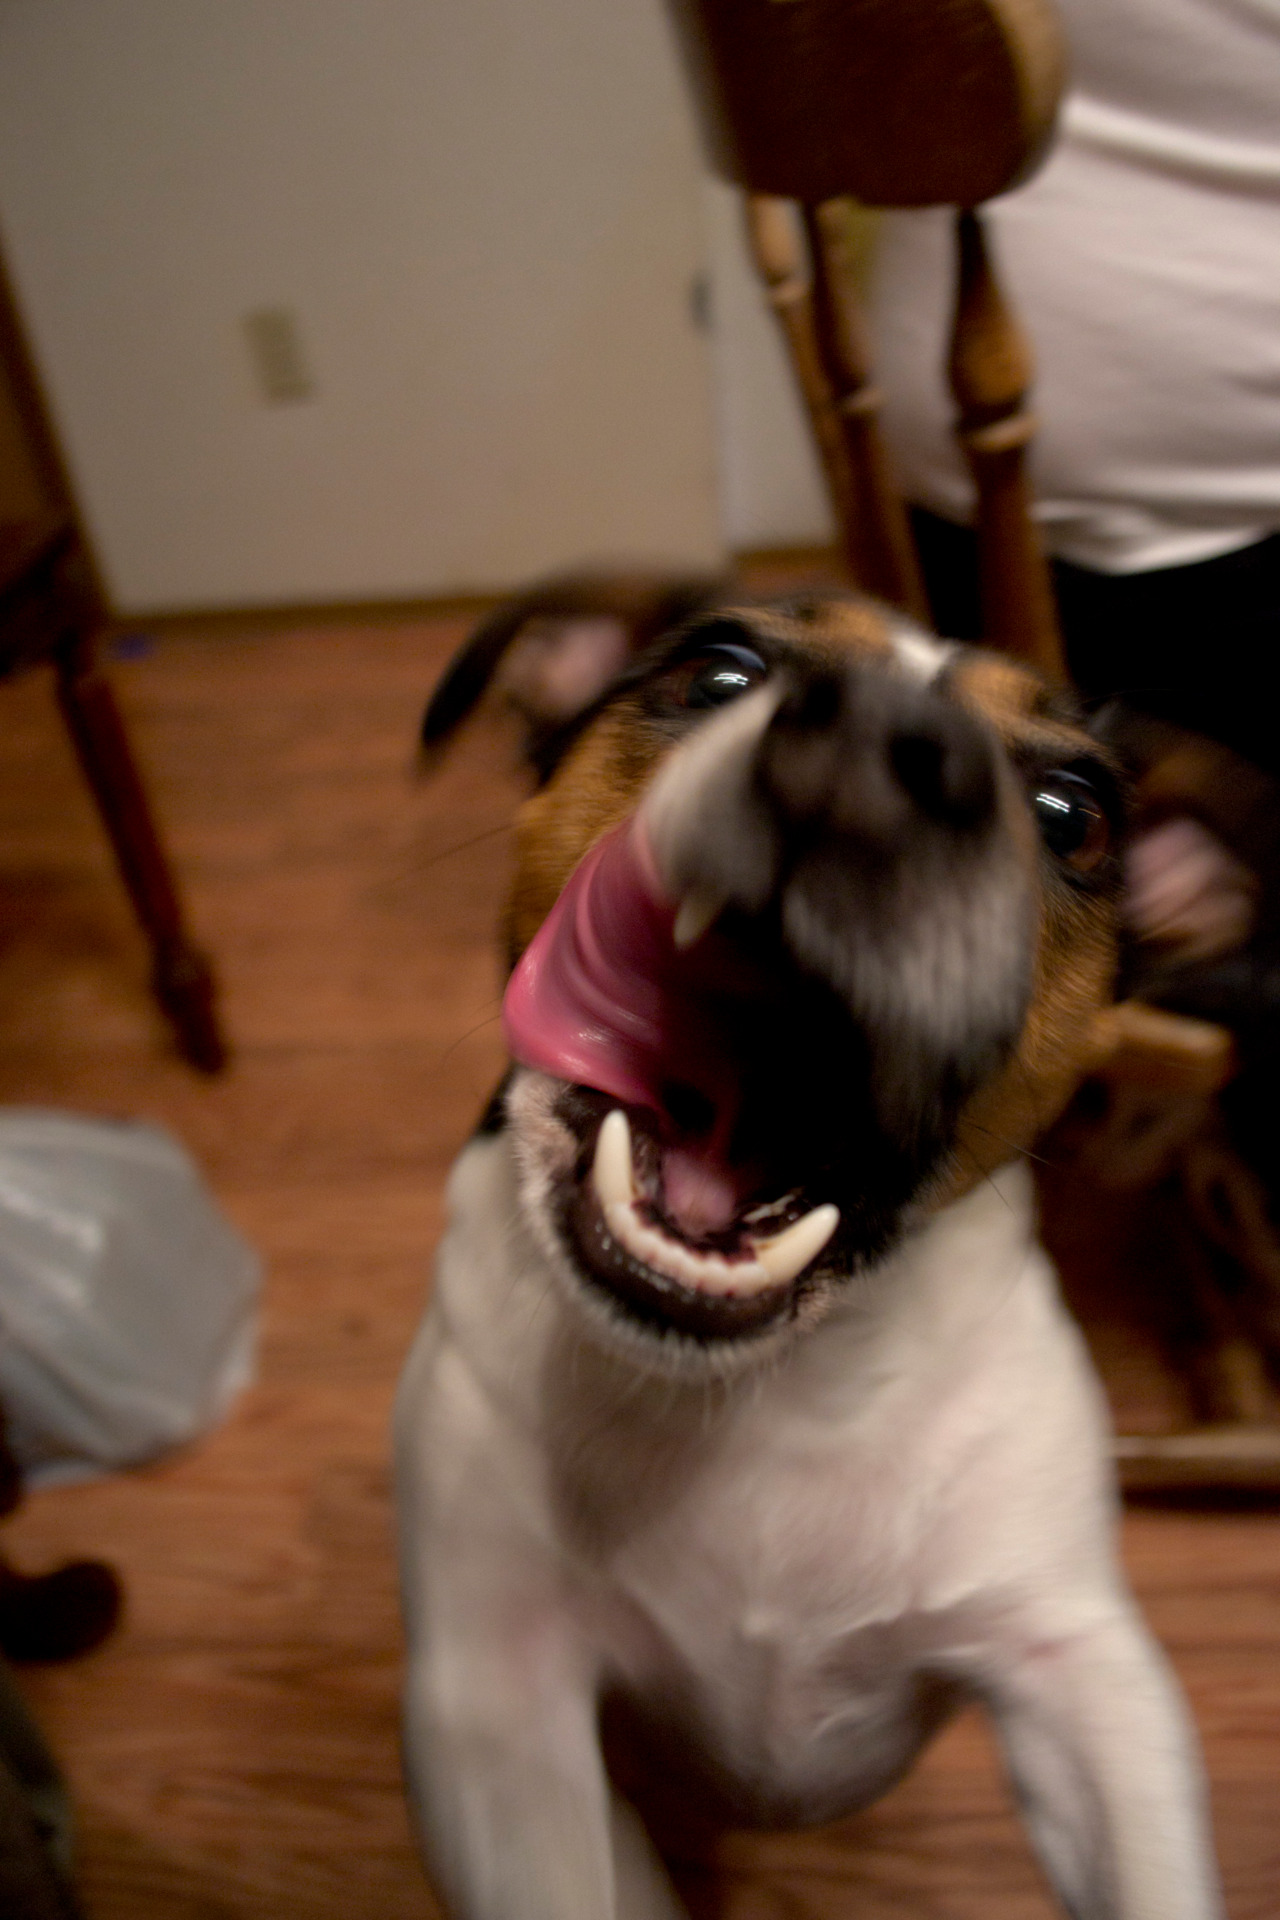 My dog, Jack. I was taking picture of a family dinner, and this adorable little guy wanted to check out my camera.